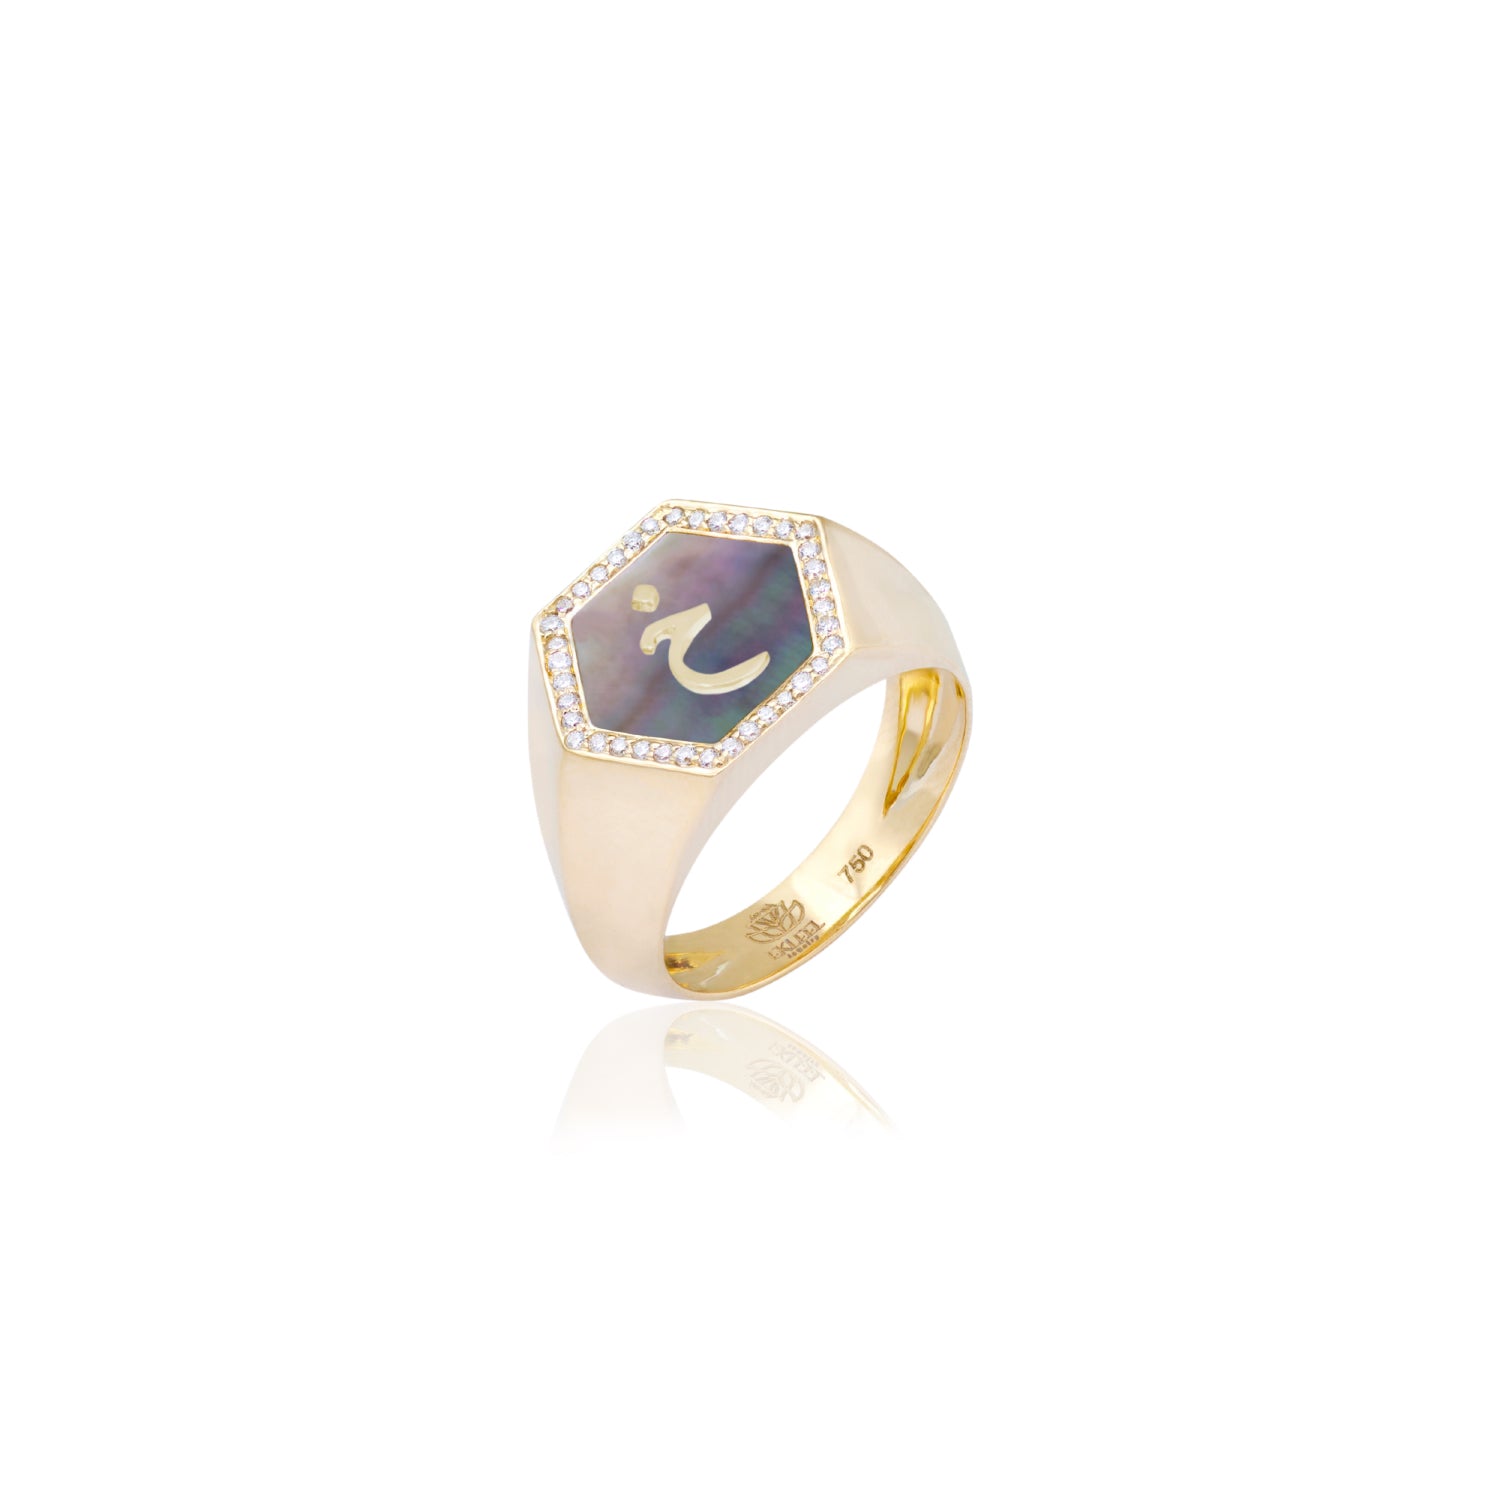 Qamoos 2.0 Letter خ Black Mother of Pearl and Diamond Signet Ring in Yellow Gold